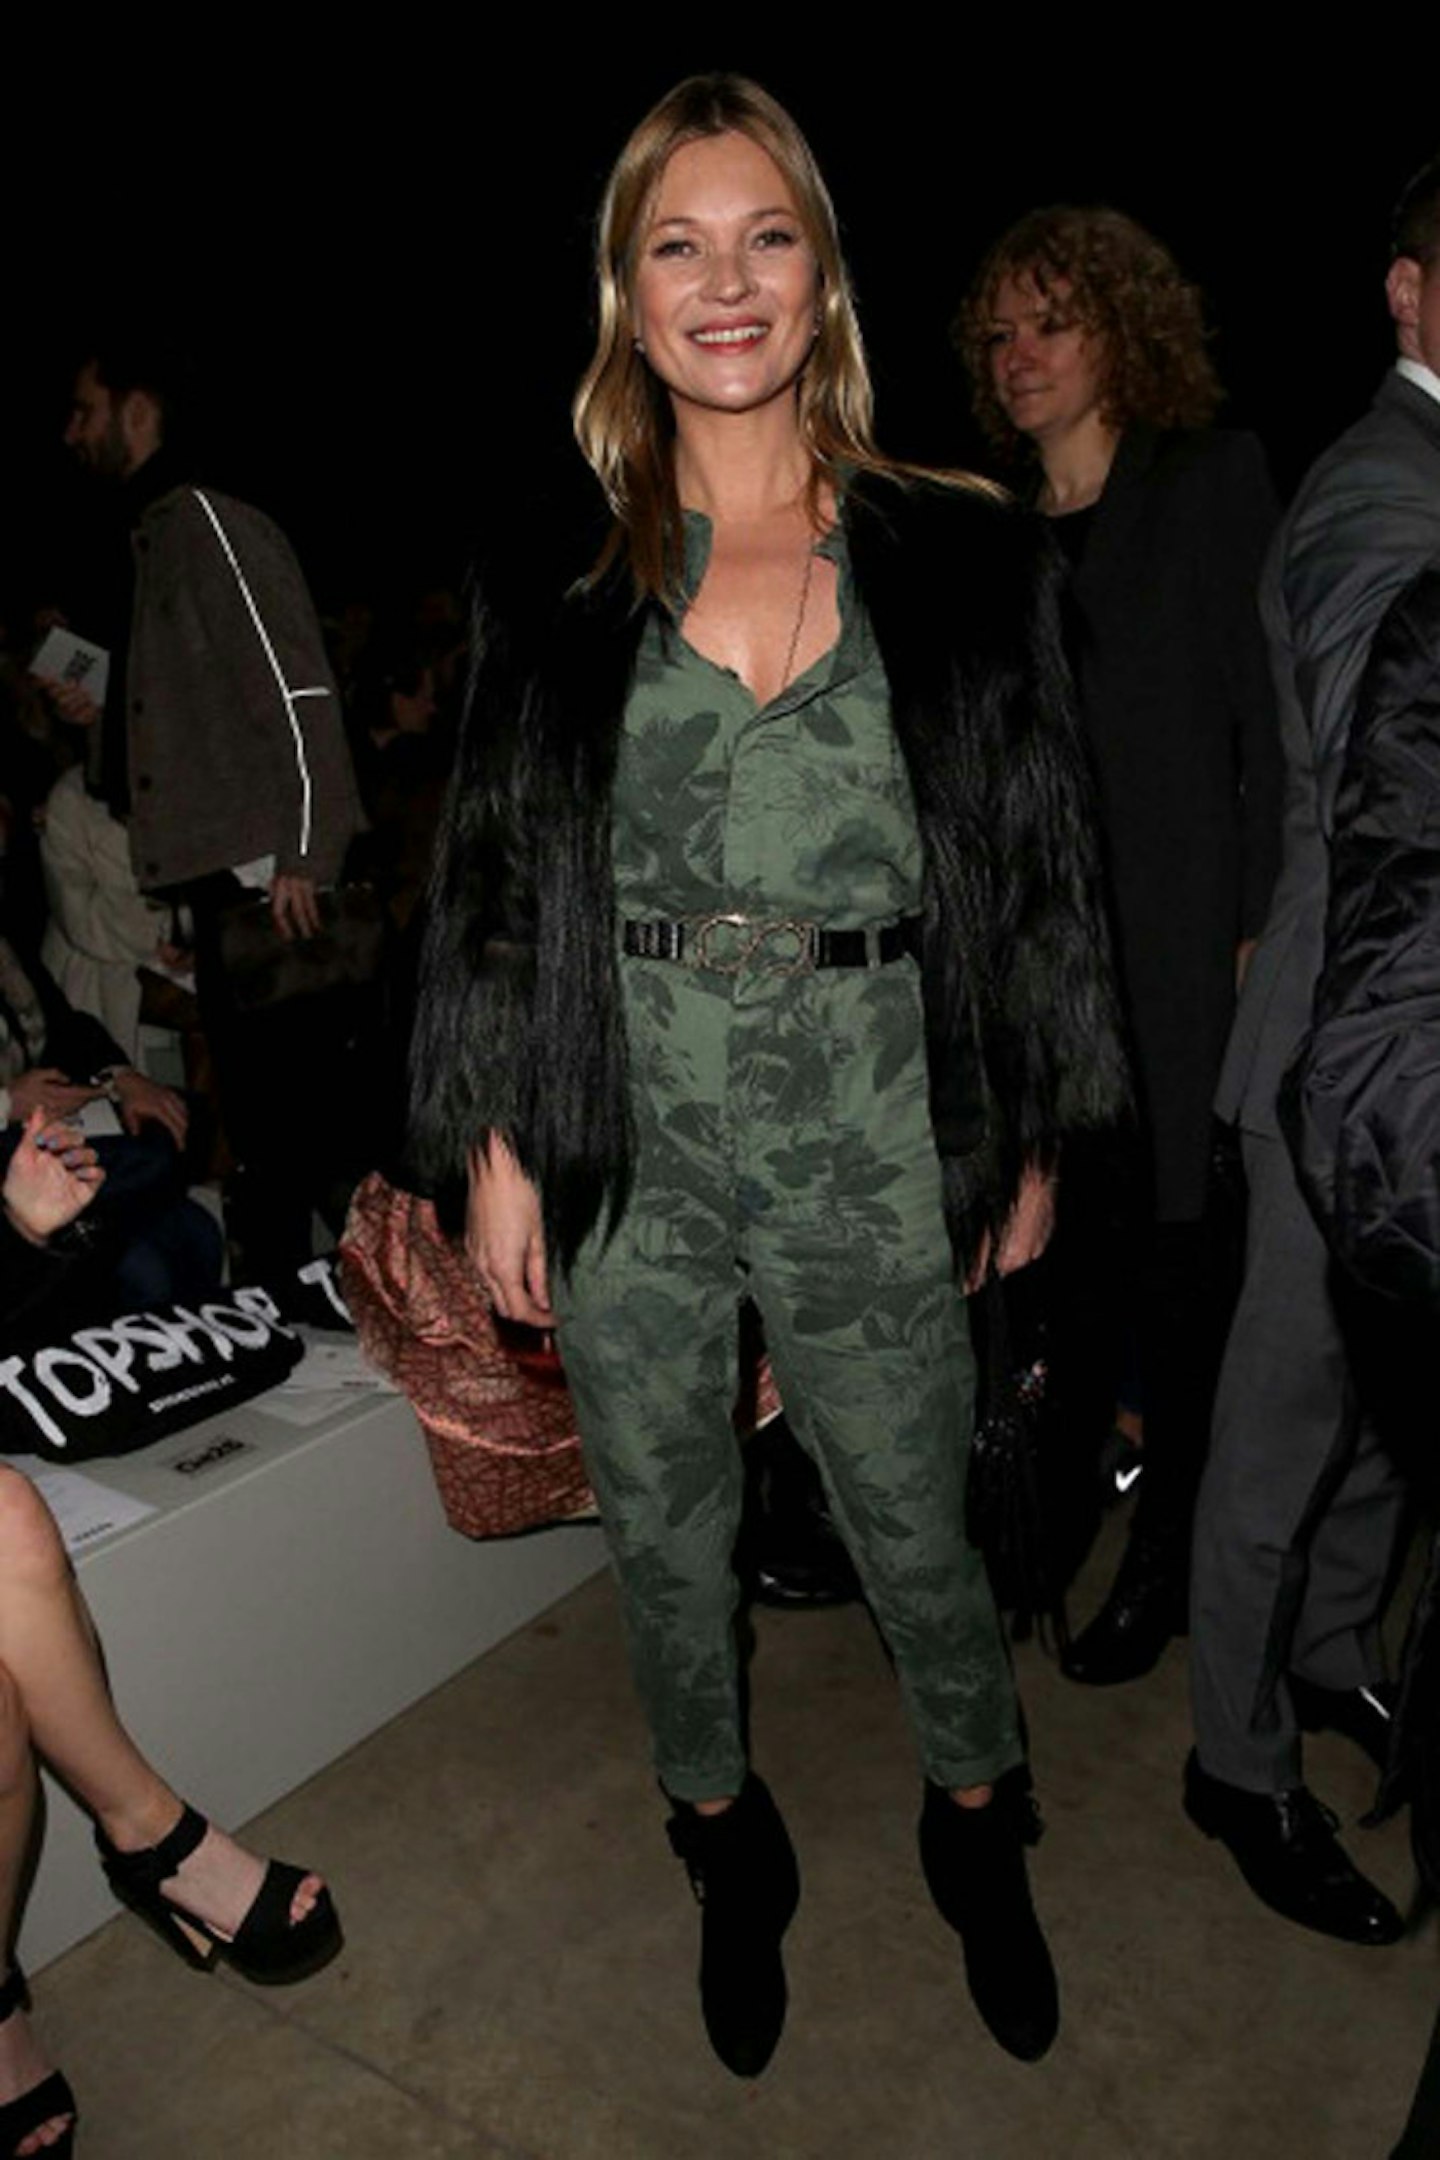 Kate Moss attends the Topshop Unique show at London Fashion Week AW14 at Tate Modern, 16 February 2014